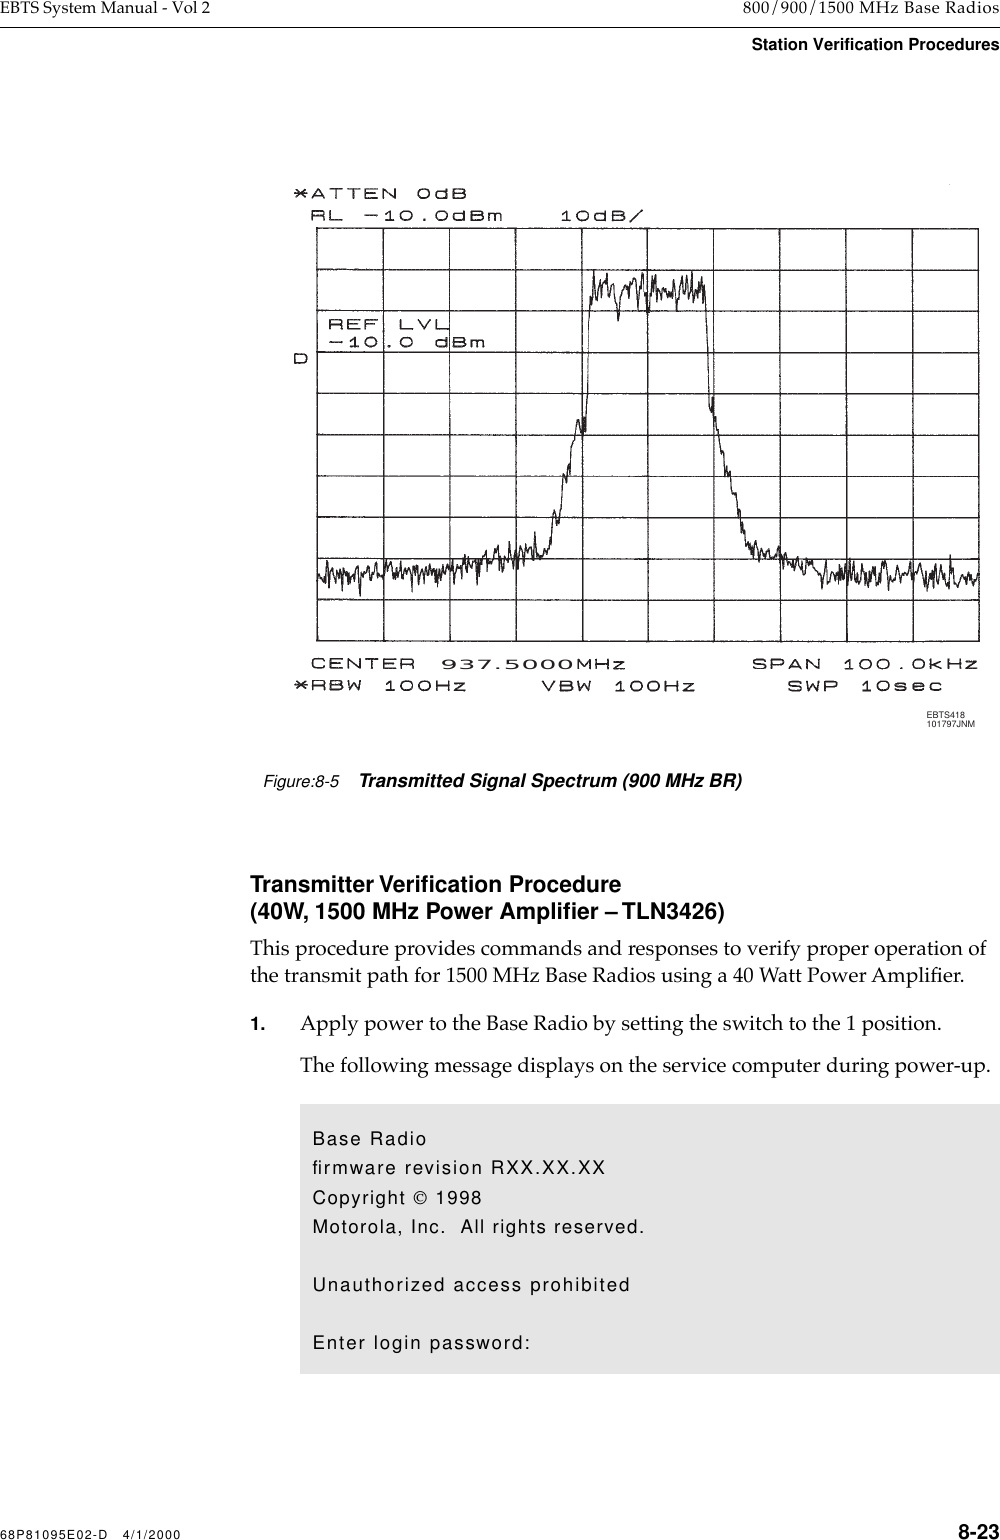 68P81095E02-D   4/1/2000 8-23EBTS System Manual - Vol 2 800/900/1500 MHz Base RadiosStation Verification ProceduresTransmitter Veriﬁcation Procedure(40W, 1500 MHz Power Ampliﬁer – TLN3426)  This procedure provides commands and responses to verify proper operation of the transmit path for 1500 MHz Base Radios using a 40 Watt Power AmpliÞer. 1. Apply power to the Base Radio by setting the switch to the 1 position. The following message displays on the service computer during power-up.EBTS071032394JNM937.5000EBTS418101797JNMFigure:8-5Transmitted Signal Spectrum (900 MHz BR)Base Radioﬁrmware revision RXX.XX.XXCopyright  1998Motorola, Inc.  All rights reserved.Unauthorized access prohibitedEnter login password: